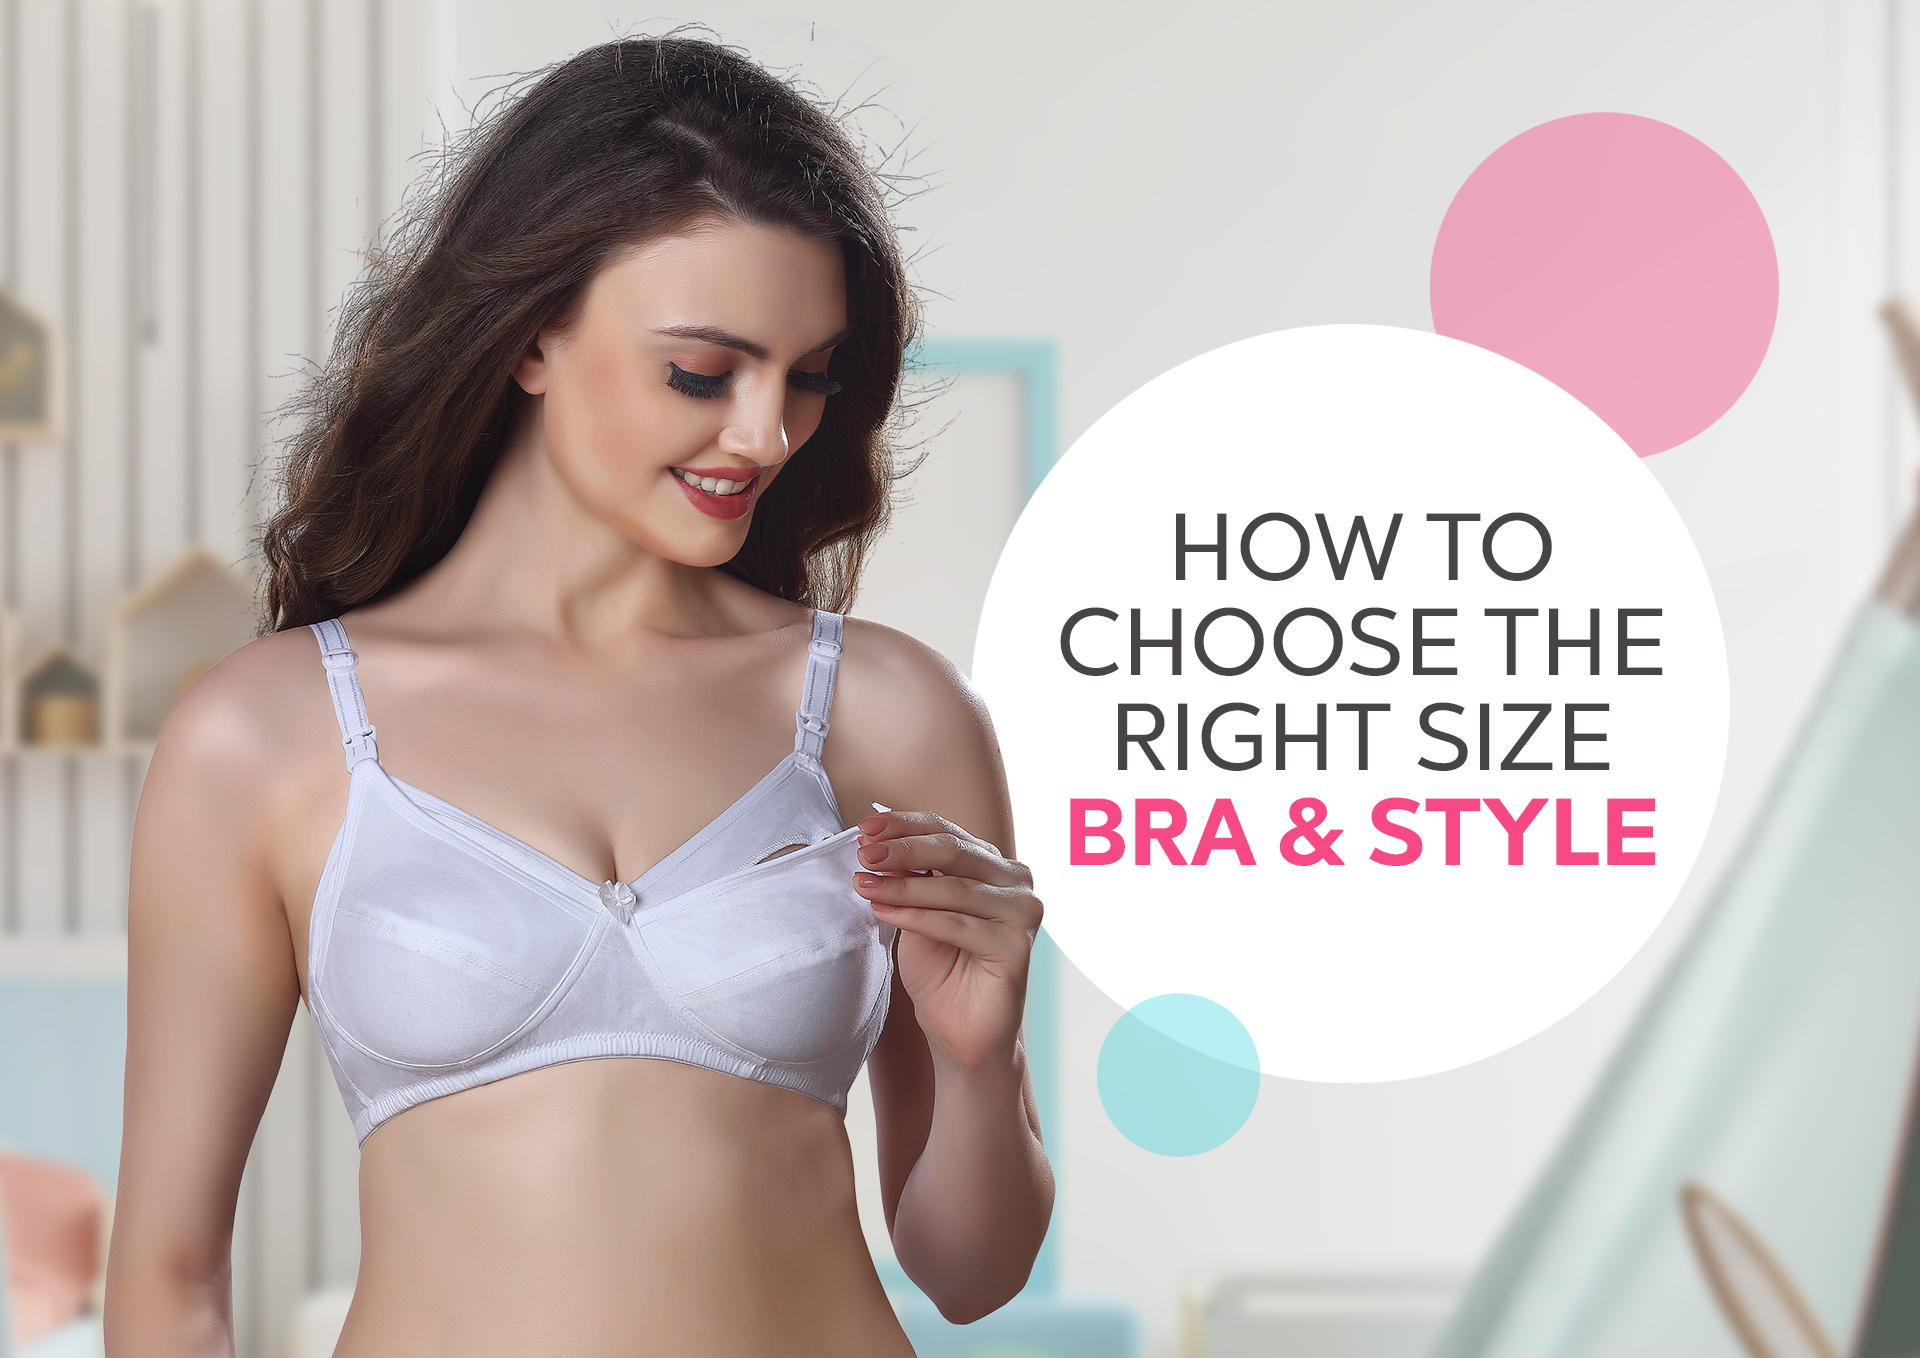 https://www.vstar.in/media//mageplaza/blog/post/t/h/the-right-size-bra-and-style.jpg